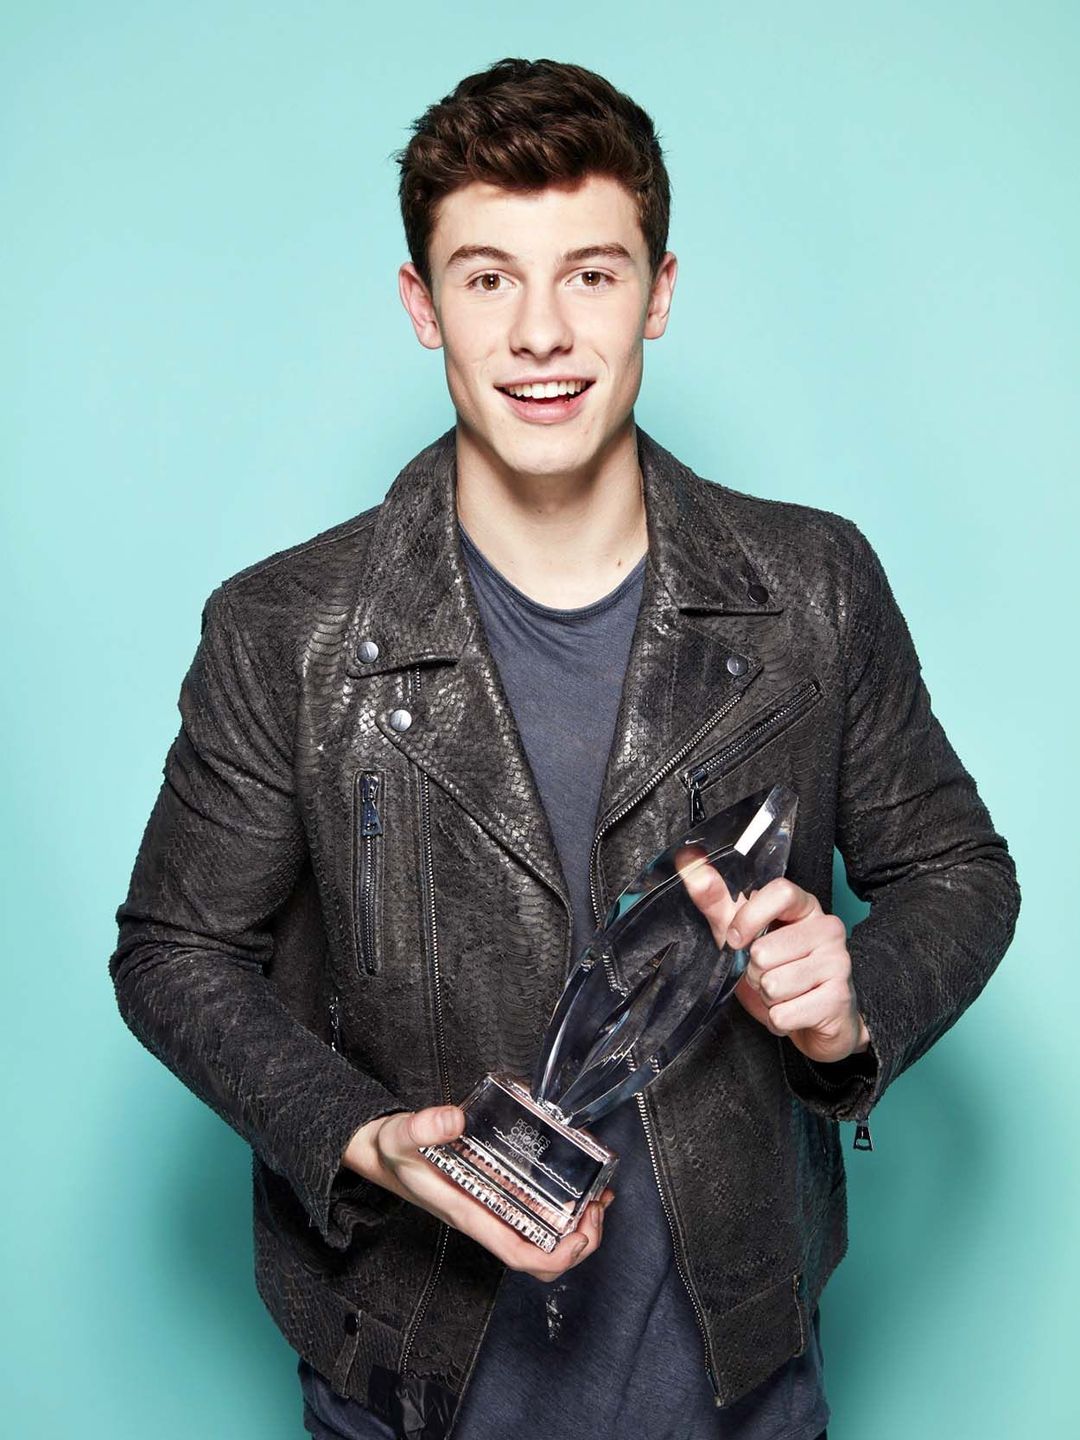 Shawn Mendes way to success